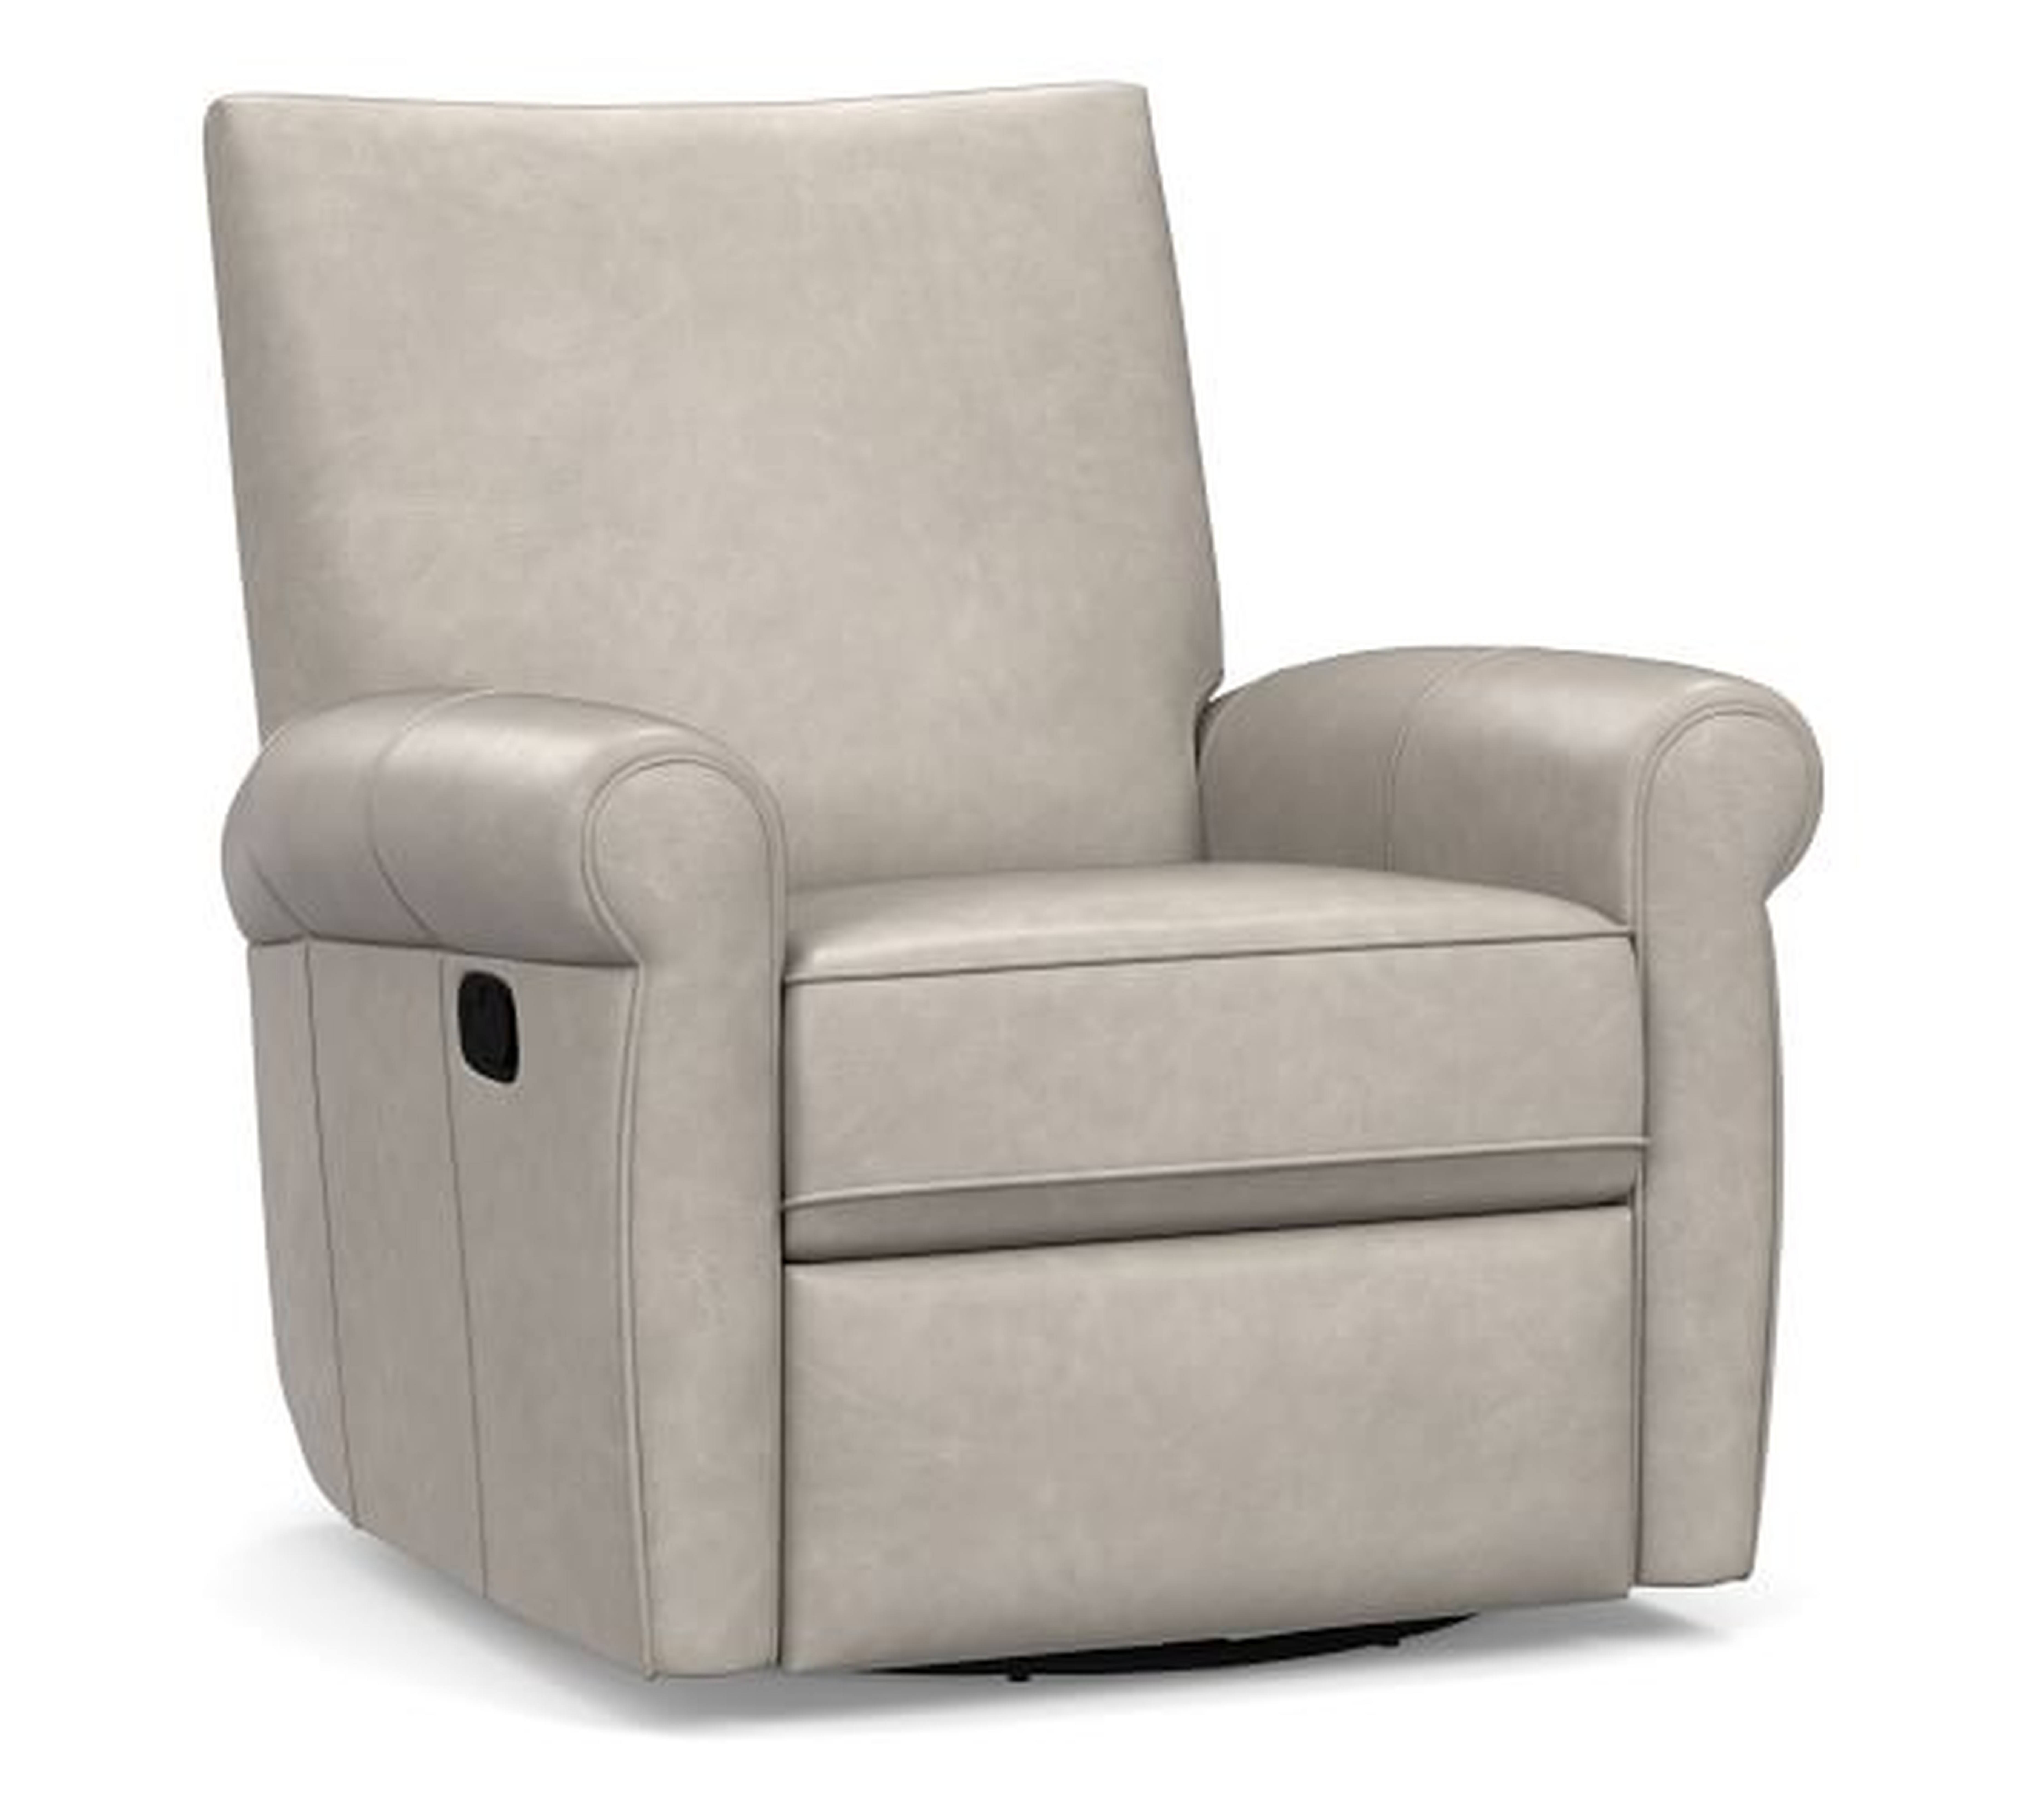 Grayson Leather Swivel Recliner, Polyester Wrapped Cushions, Statesville Pebble - Pottery Barn